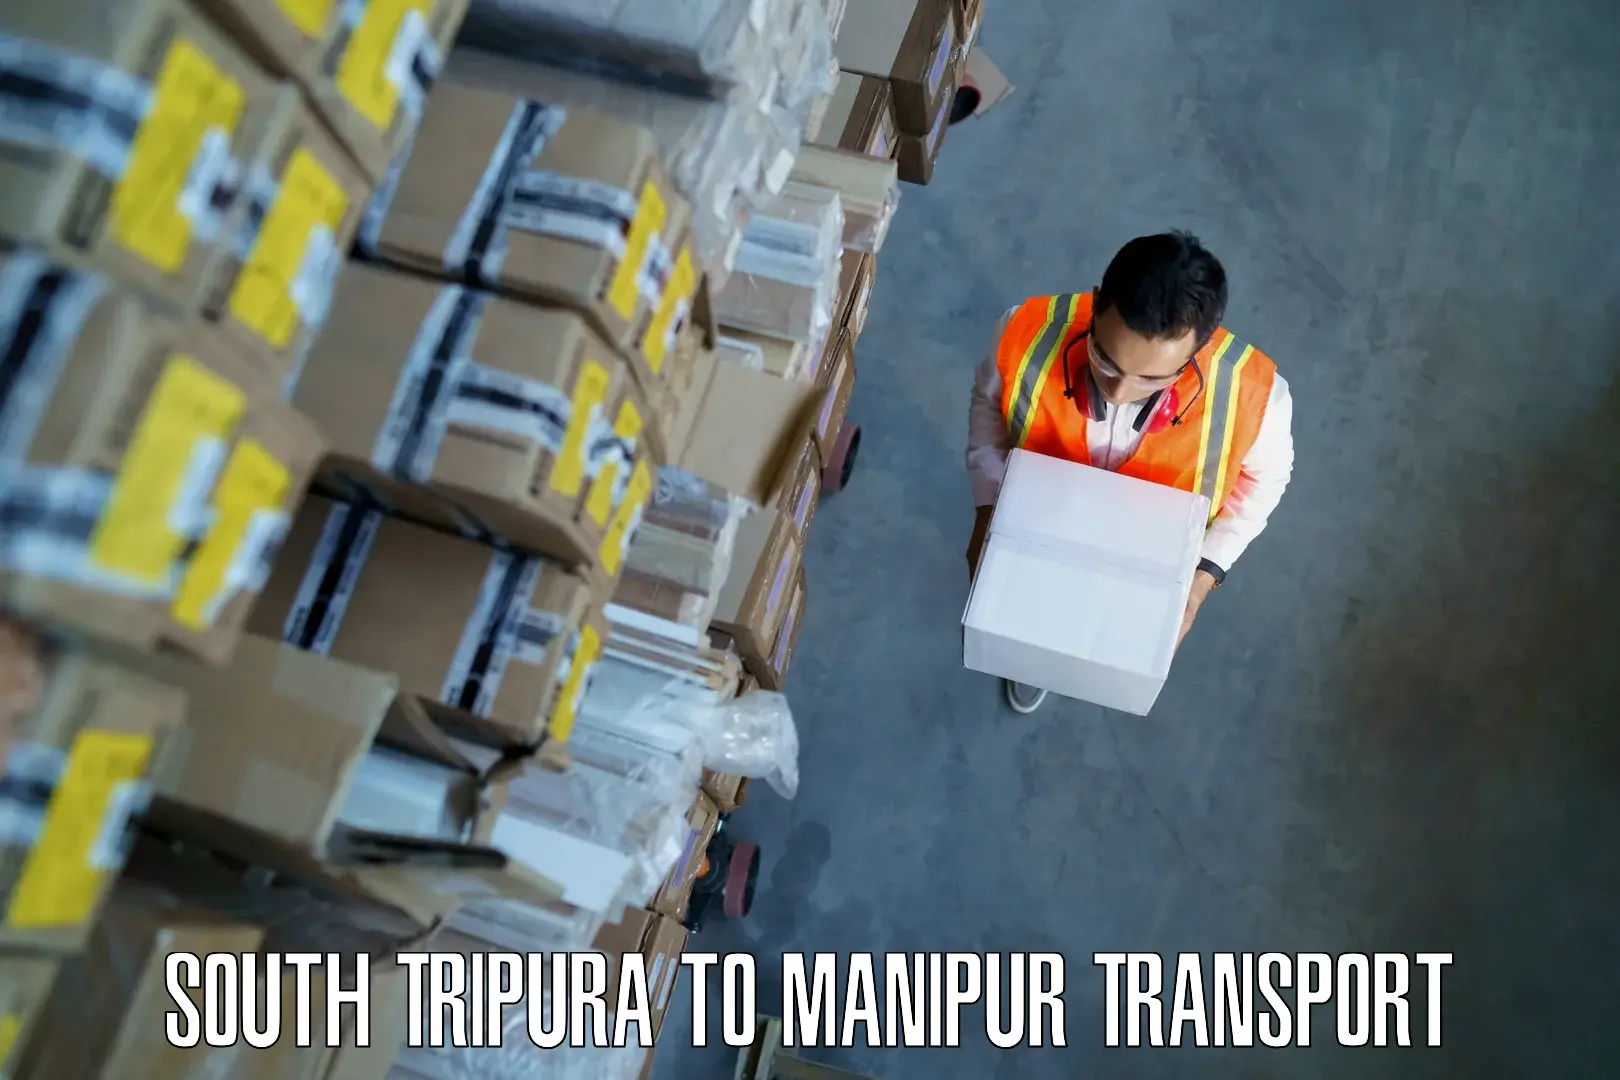 Commercial transport service South Tripura to Imphal